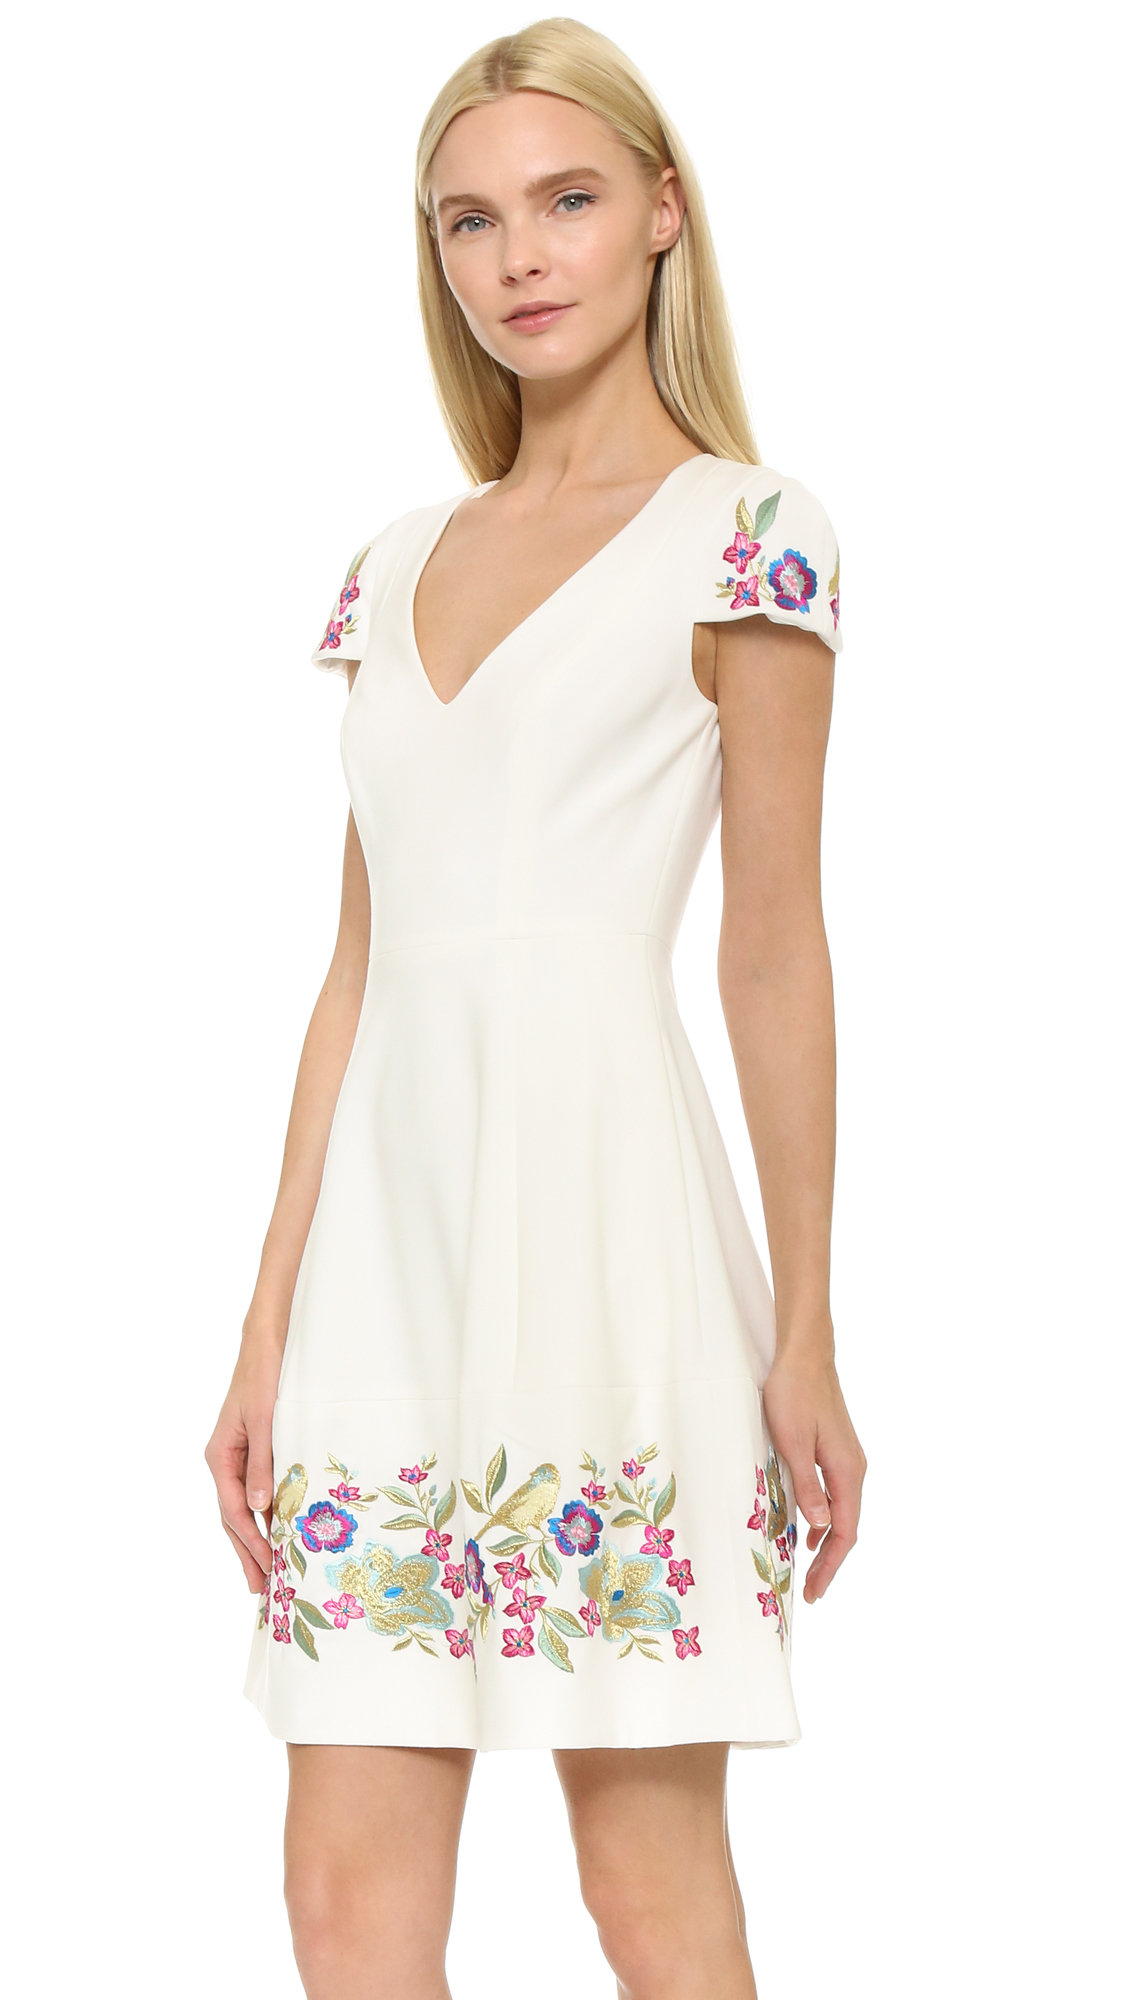 Notte by marchesa Embroidered Cocktail Dress in White - Lyst